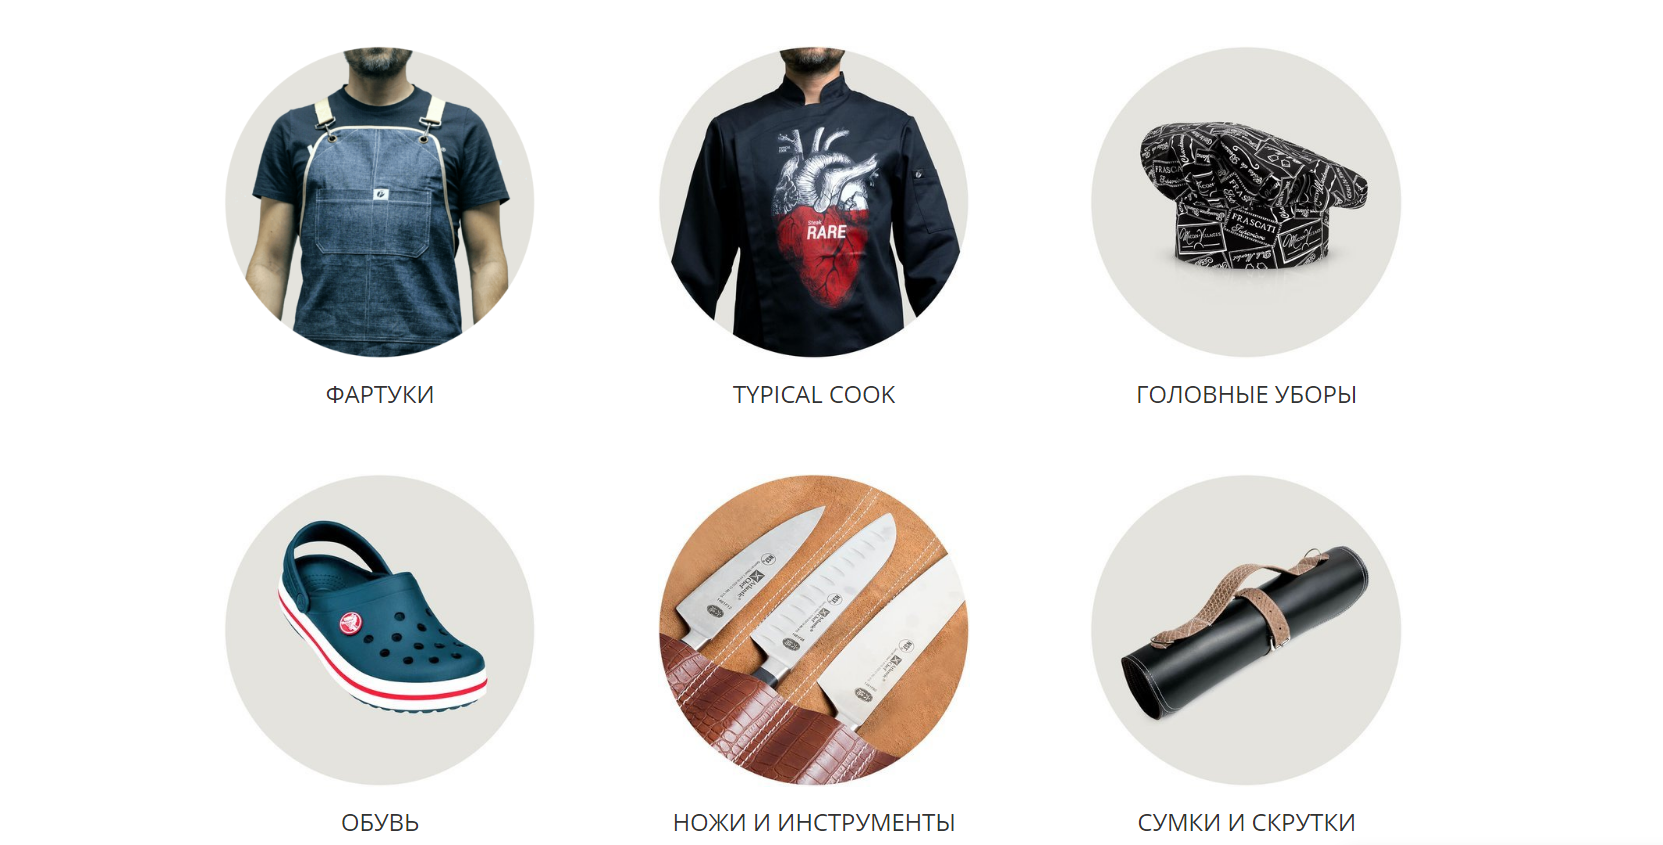 For example, an online store   Piter Prof   works on the niche of professional chefs and includes in the assortment only what can be useful to them